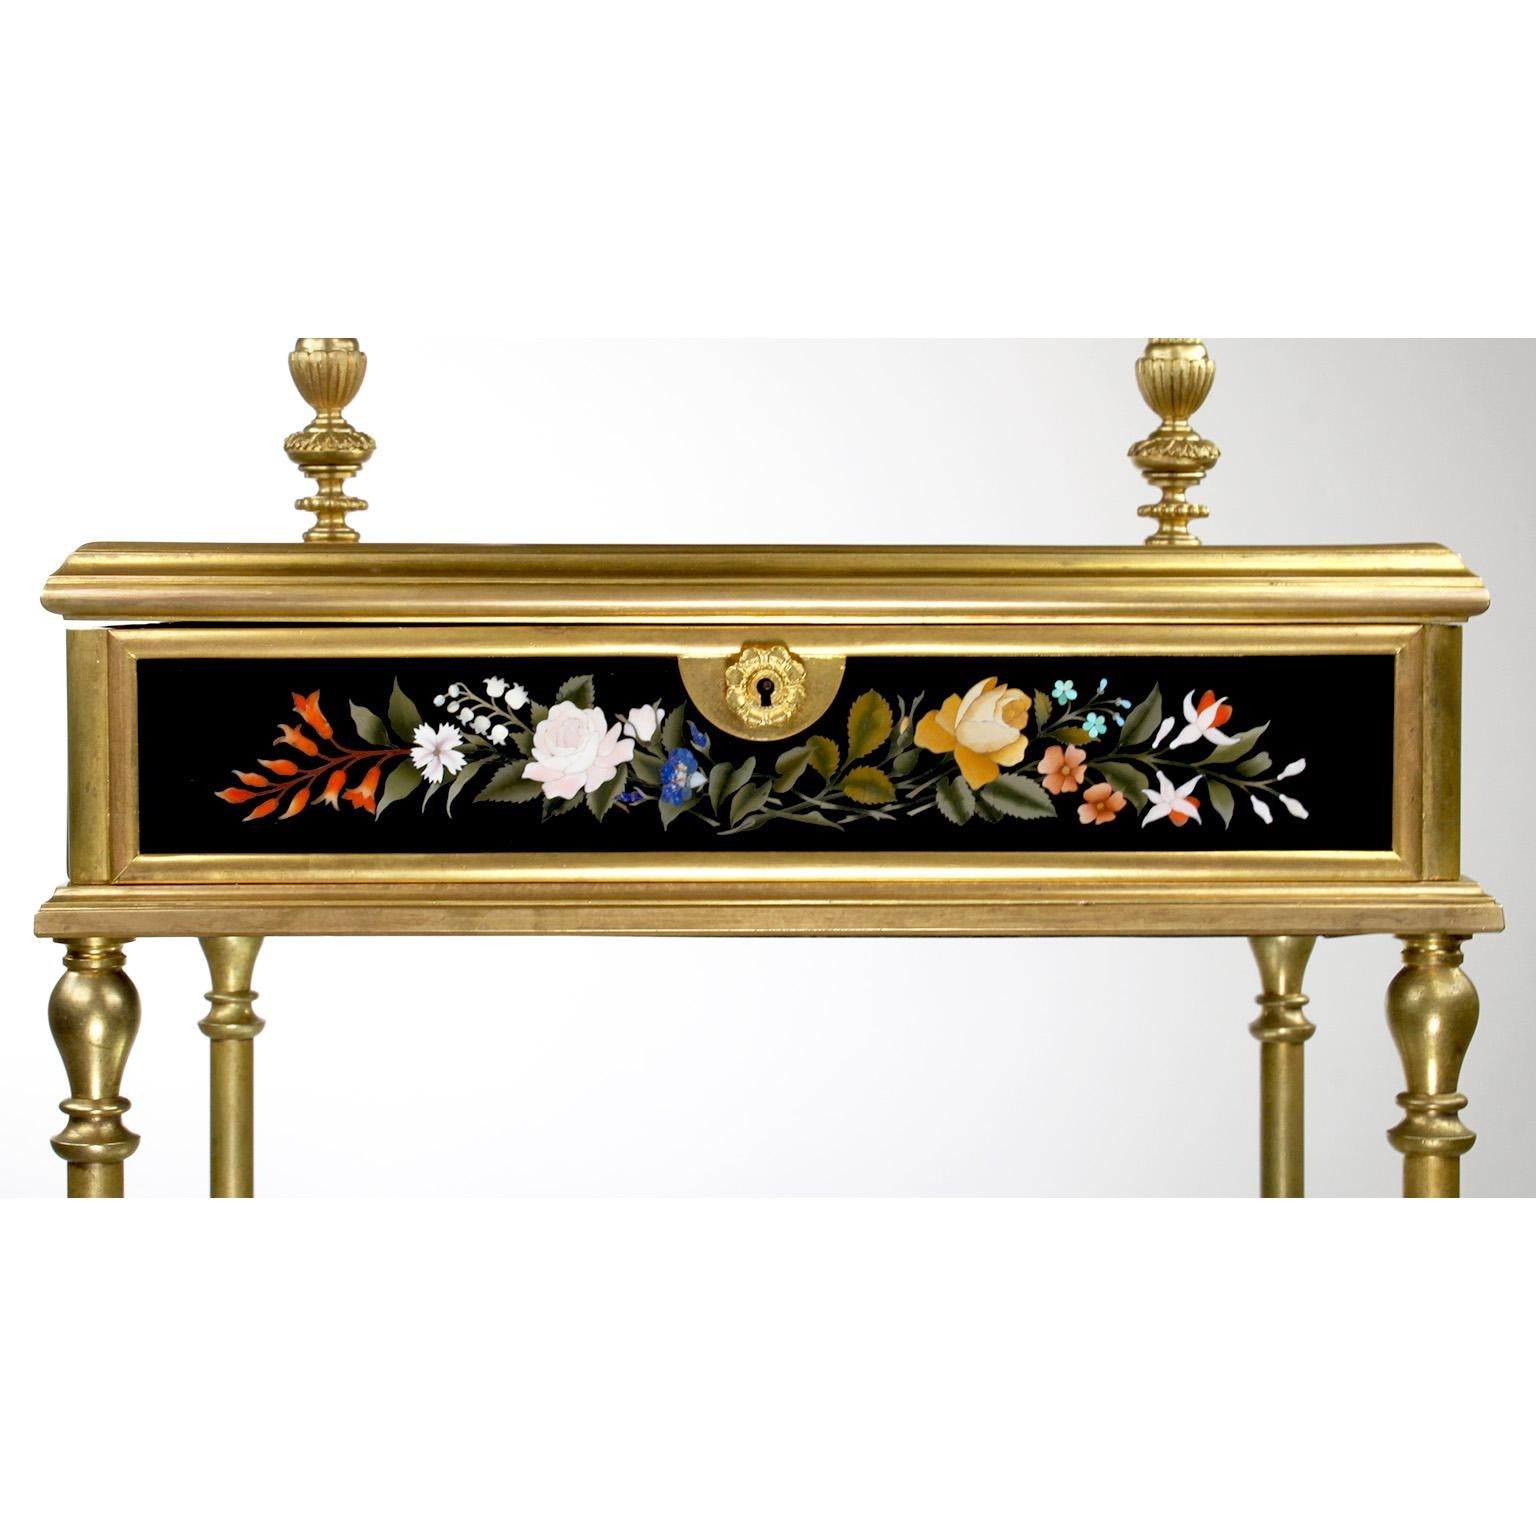 French 19th Century Gilt-Bronze and Pietra Dura Vanity Stand, Attr. Tahan, Paris For Sale 4